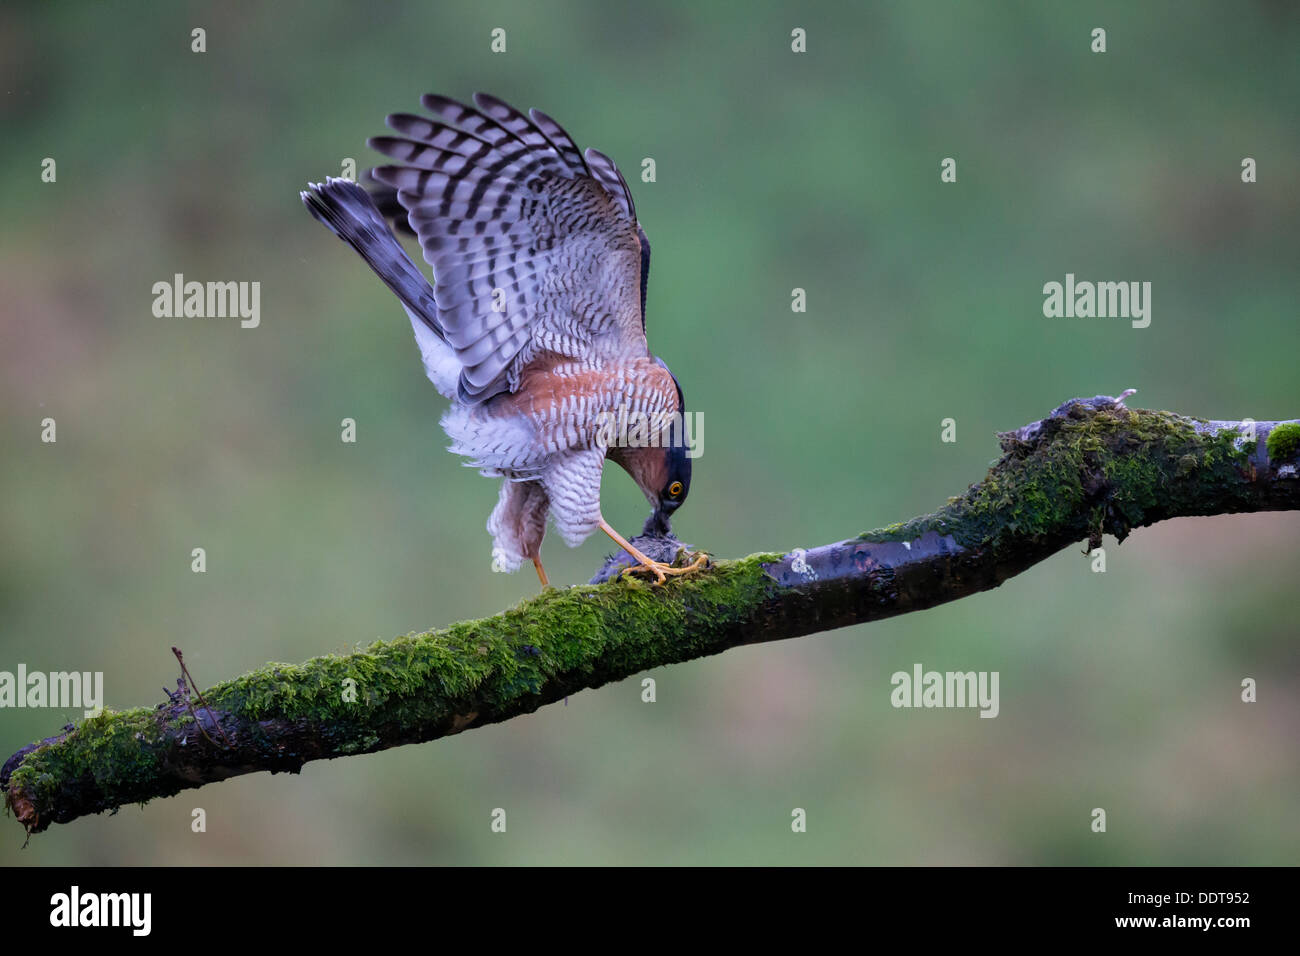 Sparrow hawk eating prey on the branch of a tree against a clear diffused green background Stock Photo